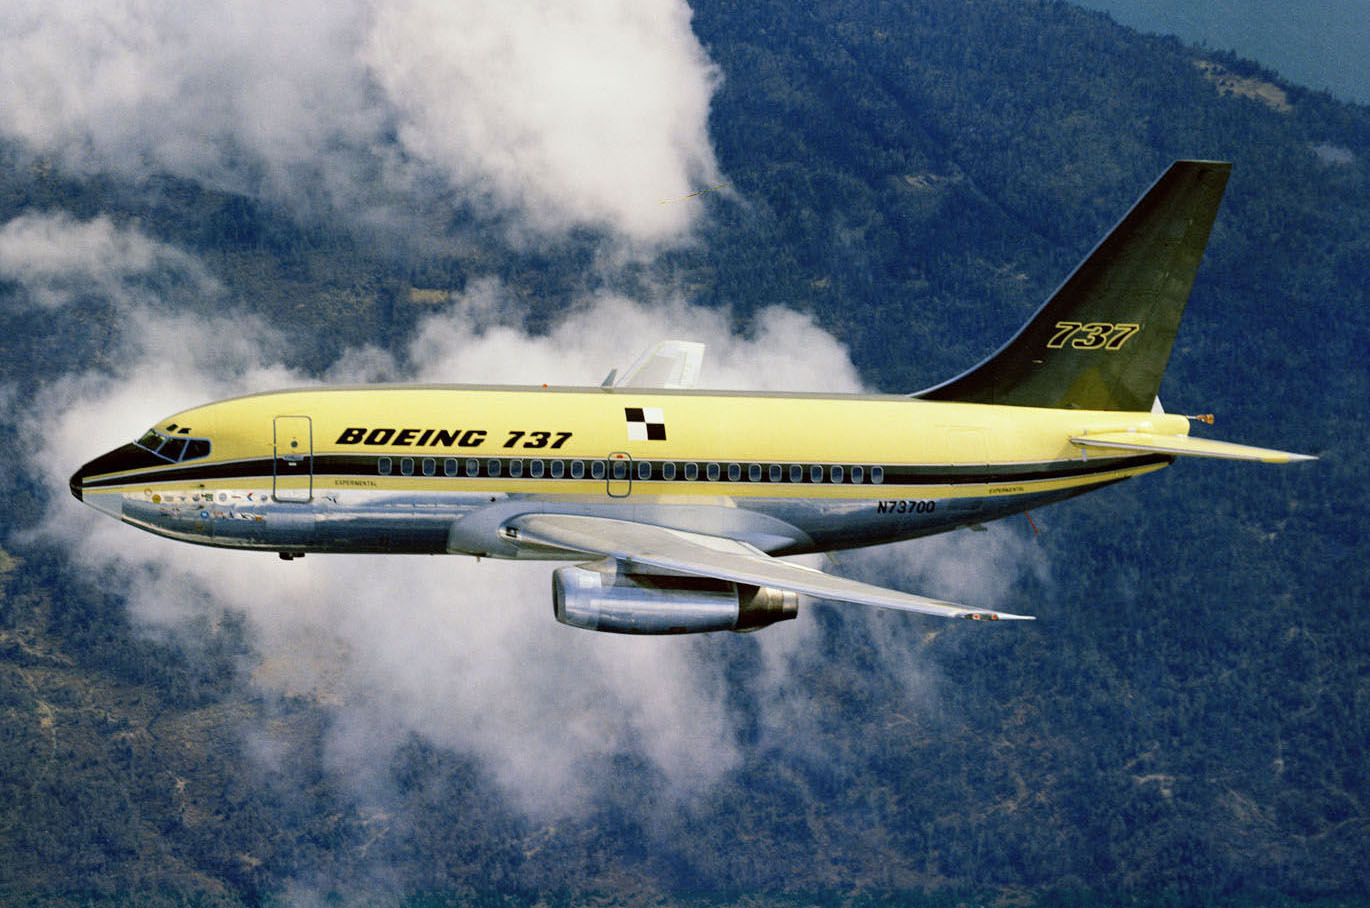 The prototype Boeing 737-130, PA-099, N73700, first flight 9 April 1967. (Boeing)